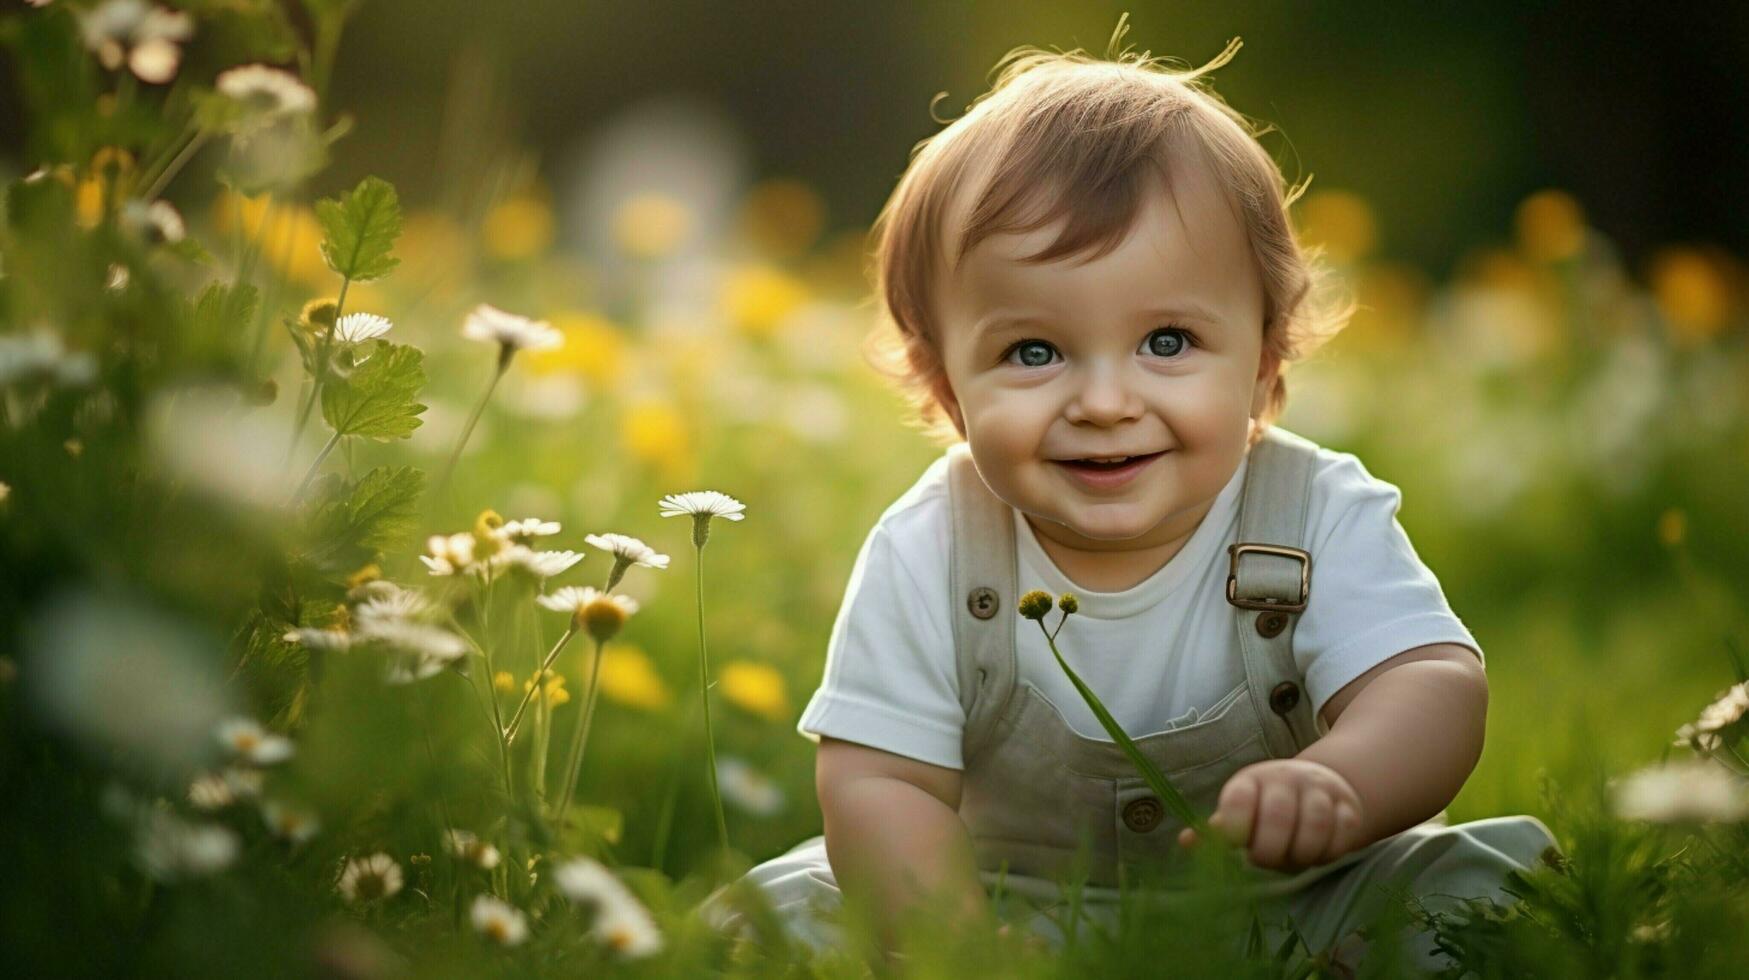 cute baby boy playing outdoors smiling with innocence photo